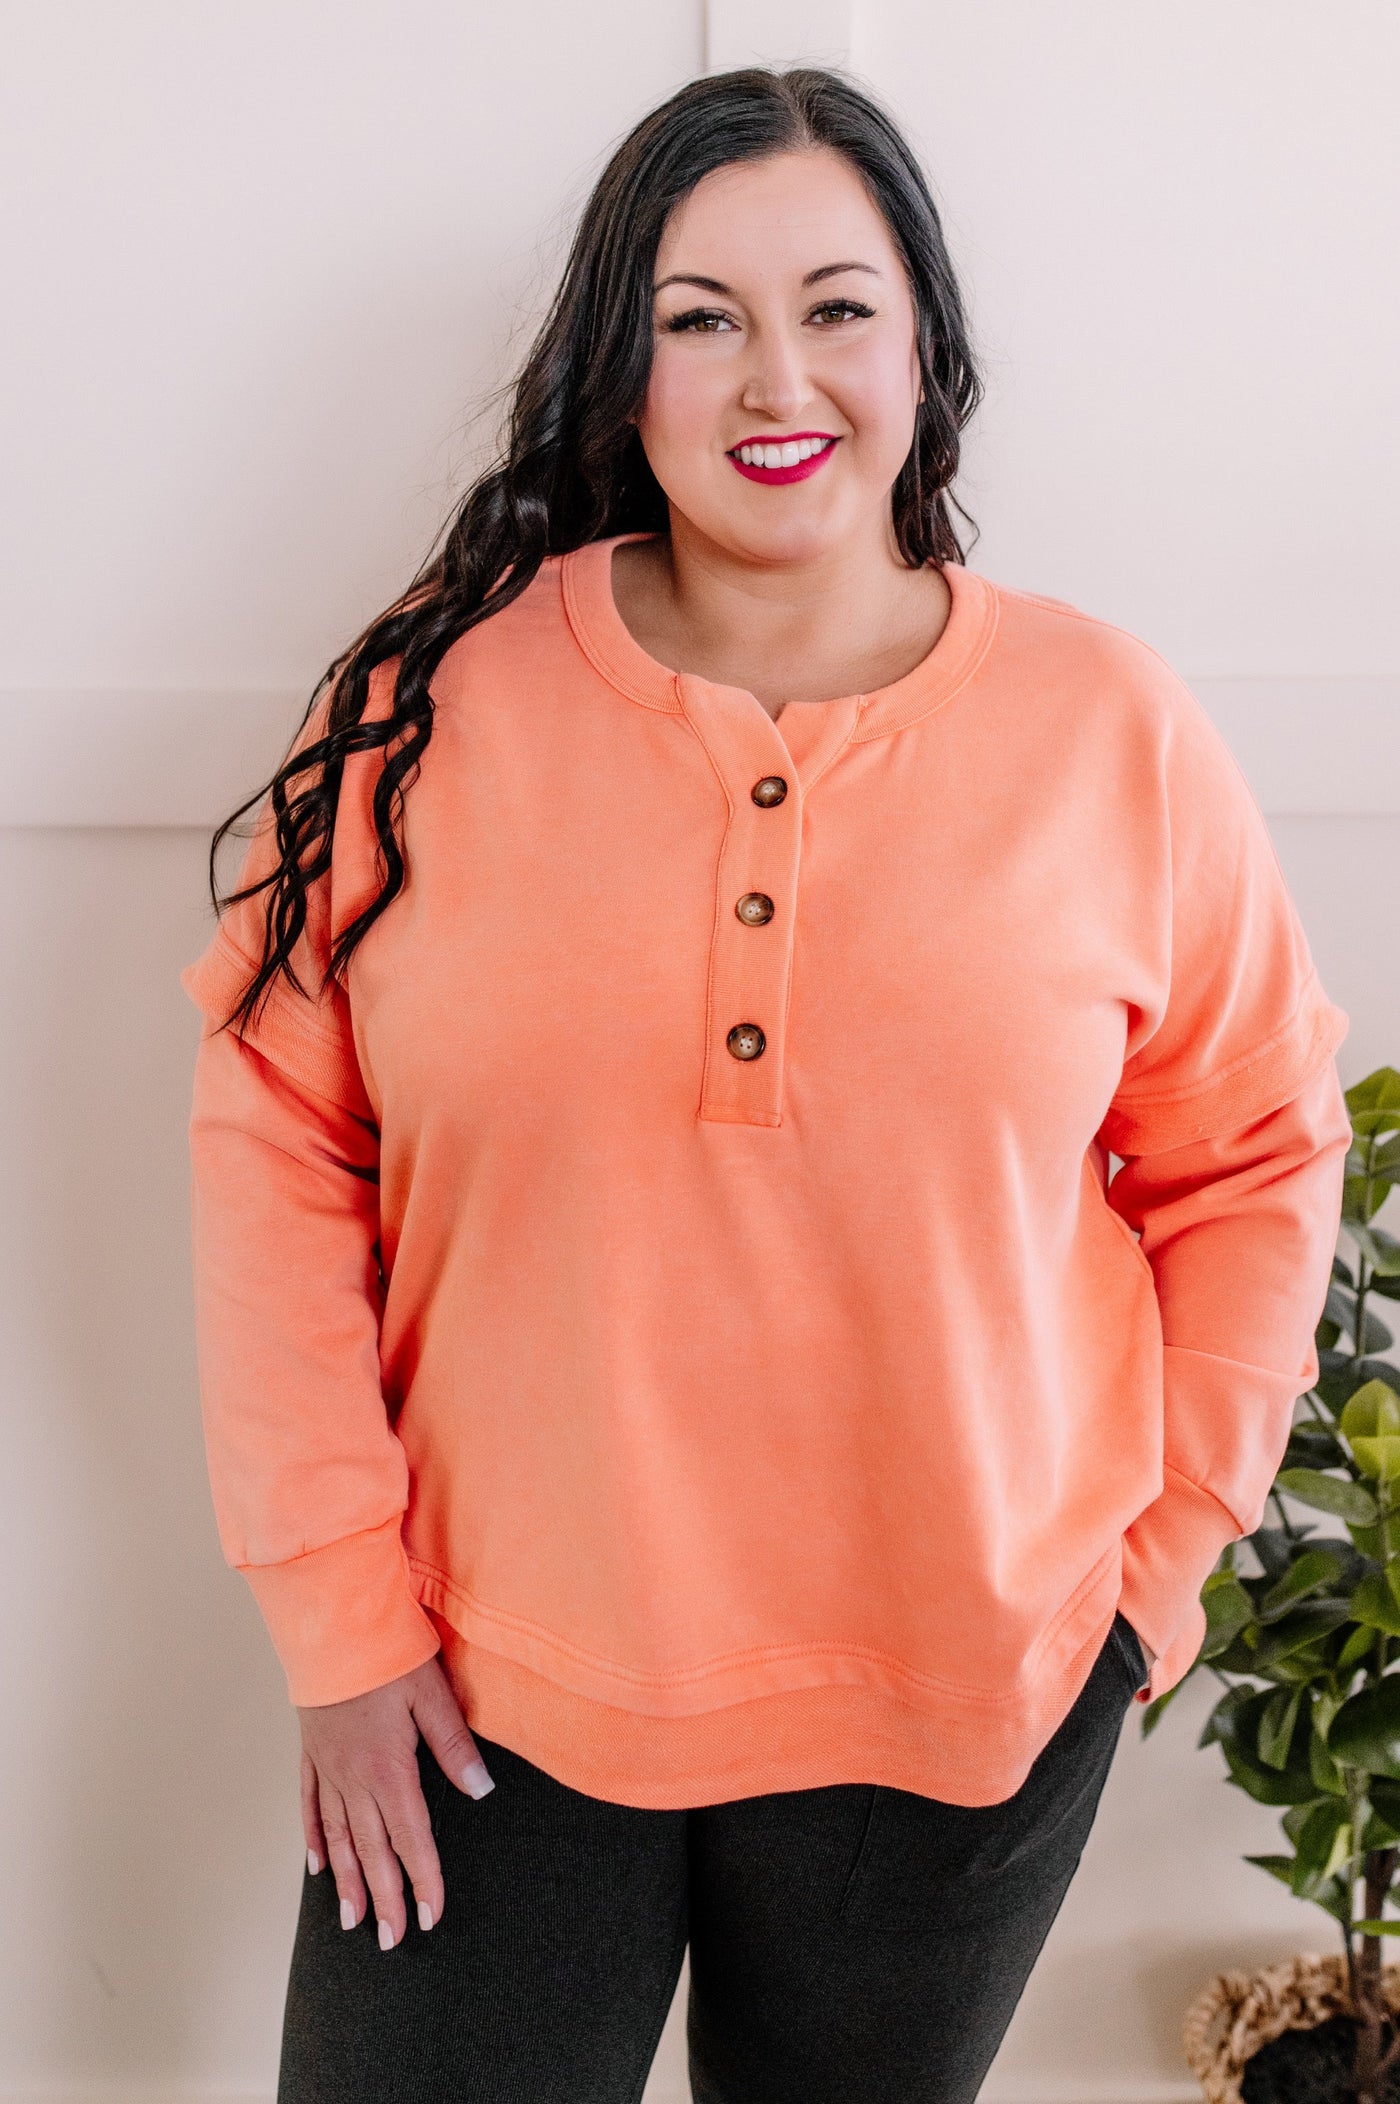 Button Front Oversized Henley In Spring Sunset